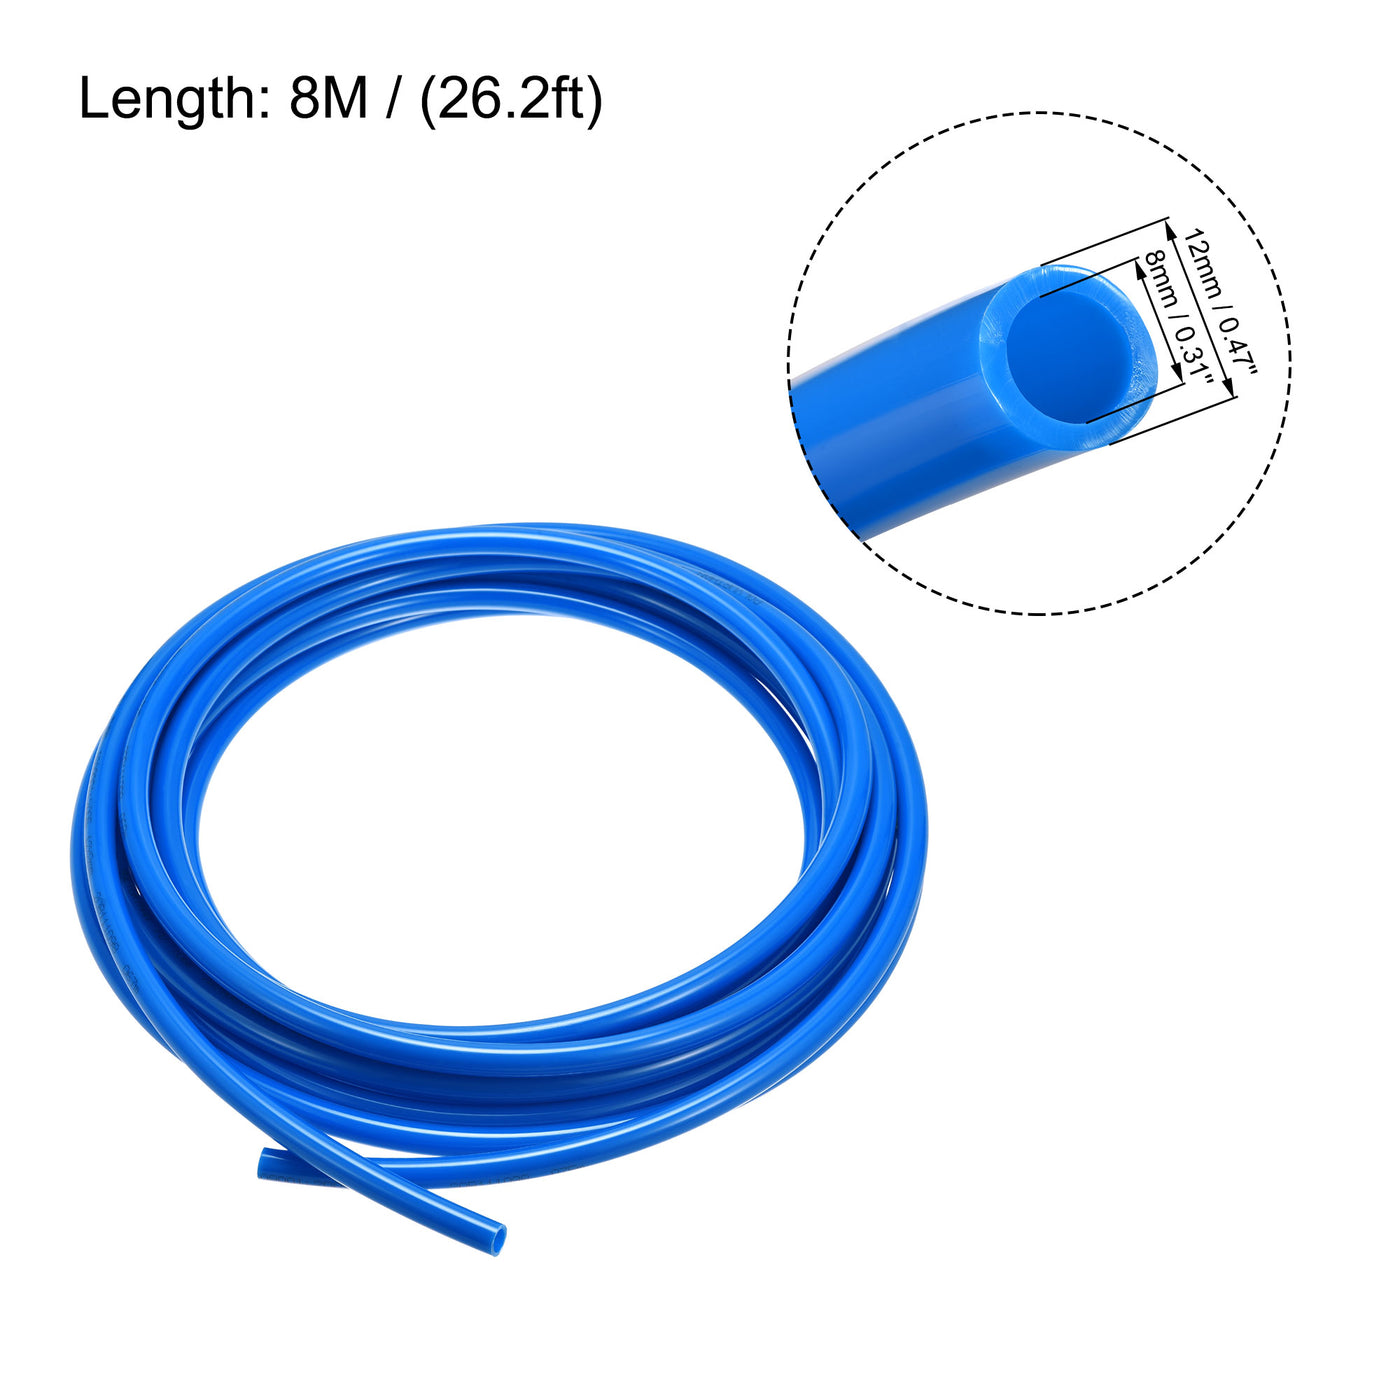 uxcell Uxcell Pneumatic Air Hose Tubing Air Compressor Tube 8mm/0.31''ID x 12mm/0.47''OD x 8m/26.2Ft Polyurethane Pipe Blue